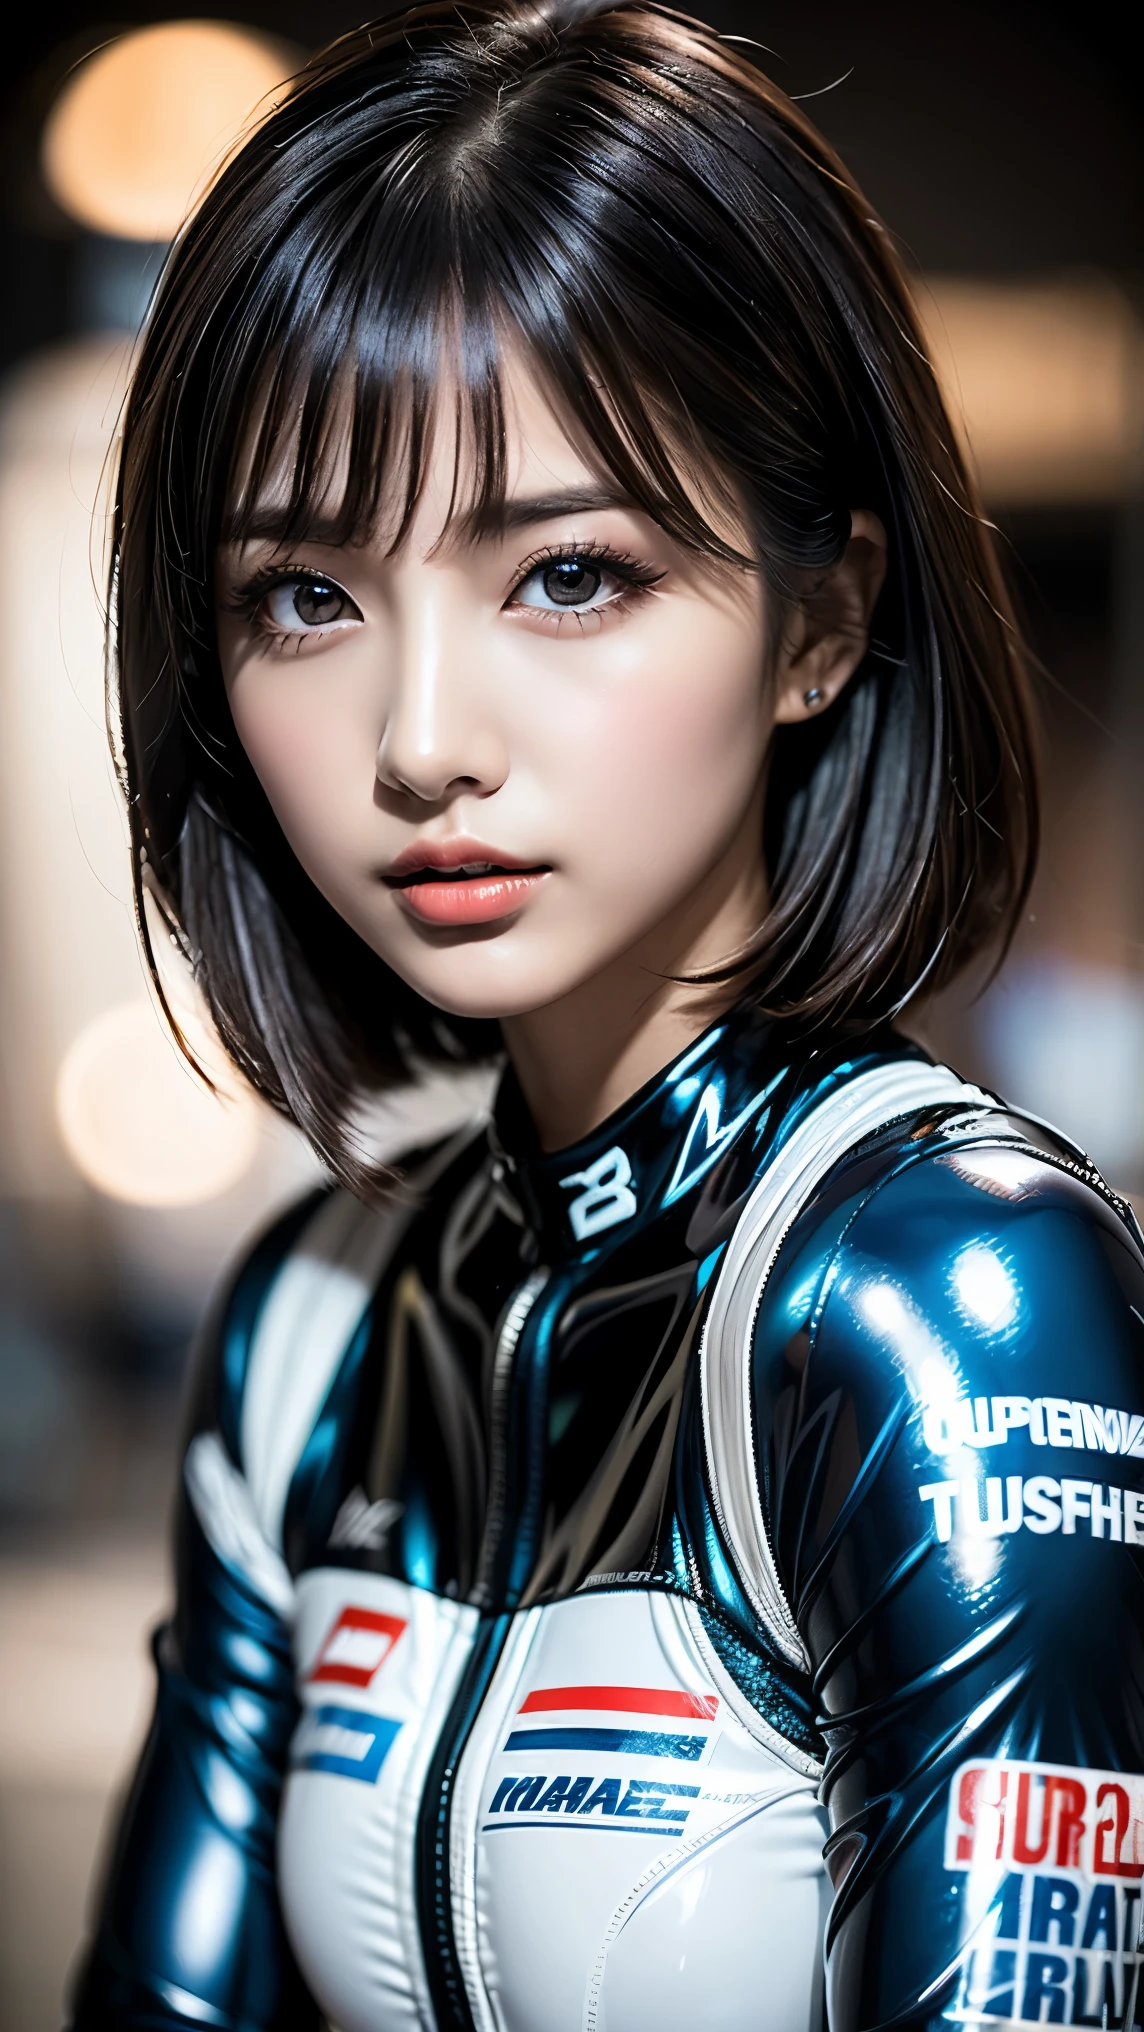 Bust up shot, Dynamic Lighting, (highest quality:1.4), 32K resolution, (Realistic:1.3), (Ultra-realism), Highest resolution UHD, (masterpiece:1.2), (Improvement of quality:1.3), (3 lady:1.37), Supermodel, Female rider, Japanese women, 21 years old, Perfect Anatomy:1.37, Standing pose, (Wearing a super shiny racing suit:1.37), (Wearing a long-sleeved racing suit:1.1), (Wearing colorful racing suits:1.21), (Logo Suit), Racing Gloves, Have a helmet:1.21, (On the vast race circuit:1.37), (Outdoors at dusk;1.37), shut up, (long_dark_eyelash), Sharpen your eyebrows, [Pink lipstick:0.8], (Very lethargic details:1.25), (Light pale complexion), Symmetrical eyes, Natural Makeup, (the most absurd quality perfect eyes:1.25), ((clear no blur and sharp perfect round realistic dark black_eyes:1.35)), super details:1.32), ((finely detailed pupils:1.32)), (tired, Sleepy and satisfied:0.0), (Beautiful Lips:1.33), (Great nose:1.2), (Flat Chest), (Slim lower body), Shiny brown hair, Let your bangs hang long, (short hair:1.21), ((Realistic)), ((Sharp focus)), ((The most absurdres quality)), Inspiring and spectacular cinema lighting, ((close-up of woman's eyes:1.3))